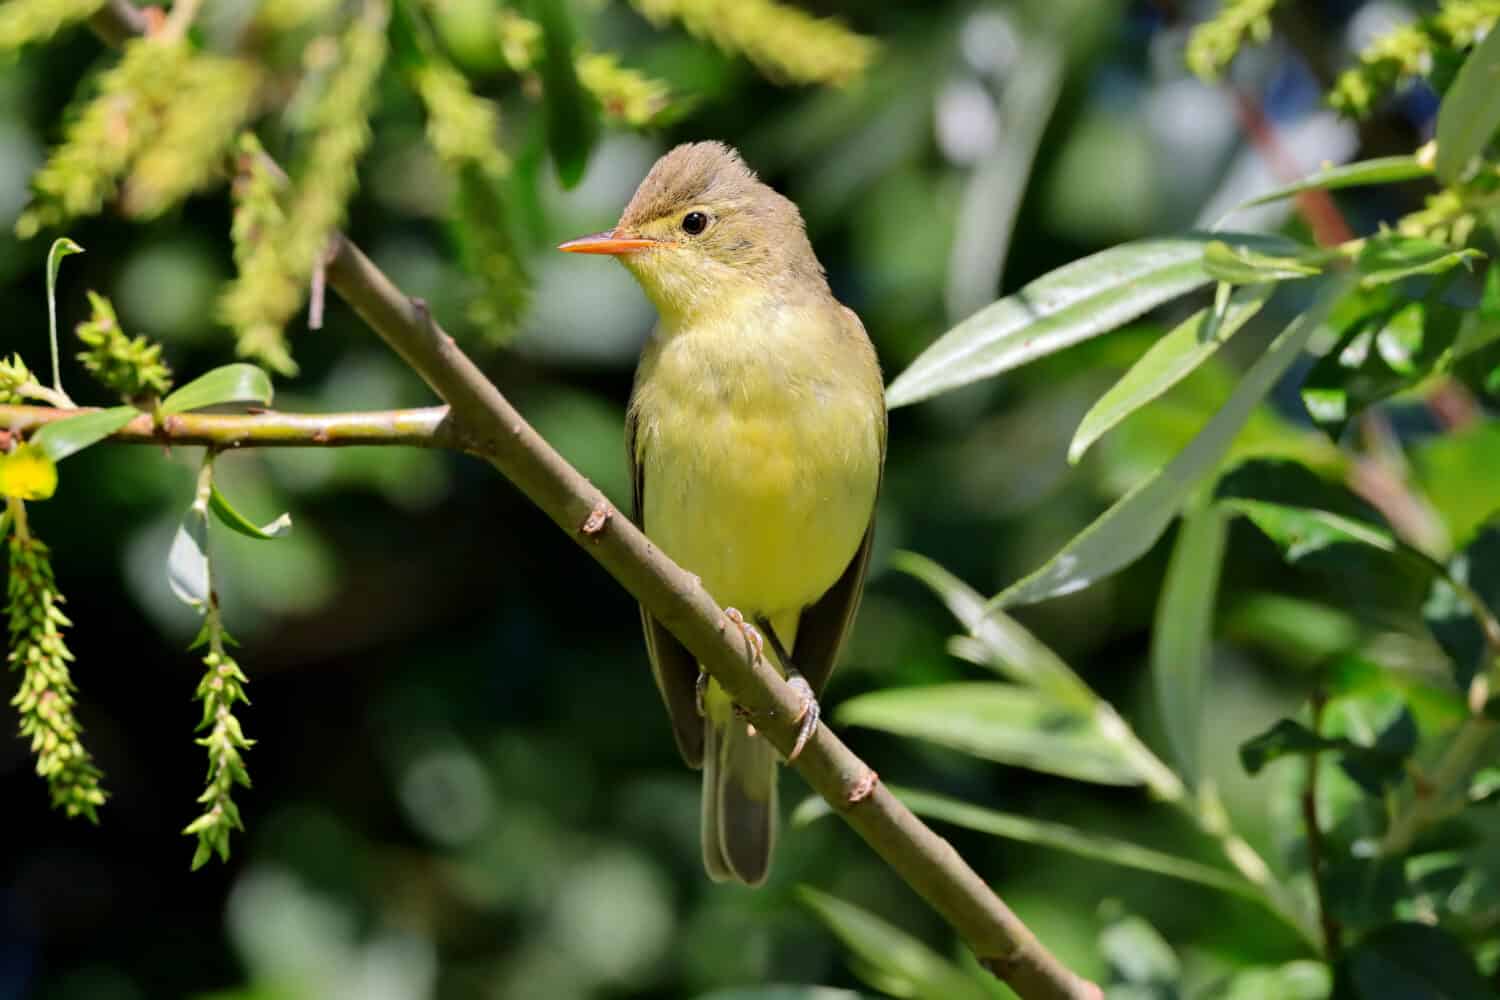 The icterine warbler (Hippolais icterina) is an Old World warbler in the tree warbler genus Hippolais, with a fantastic bright yellow colored plumage.